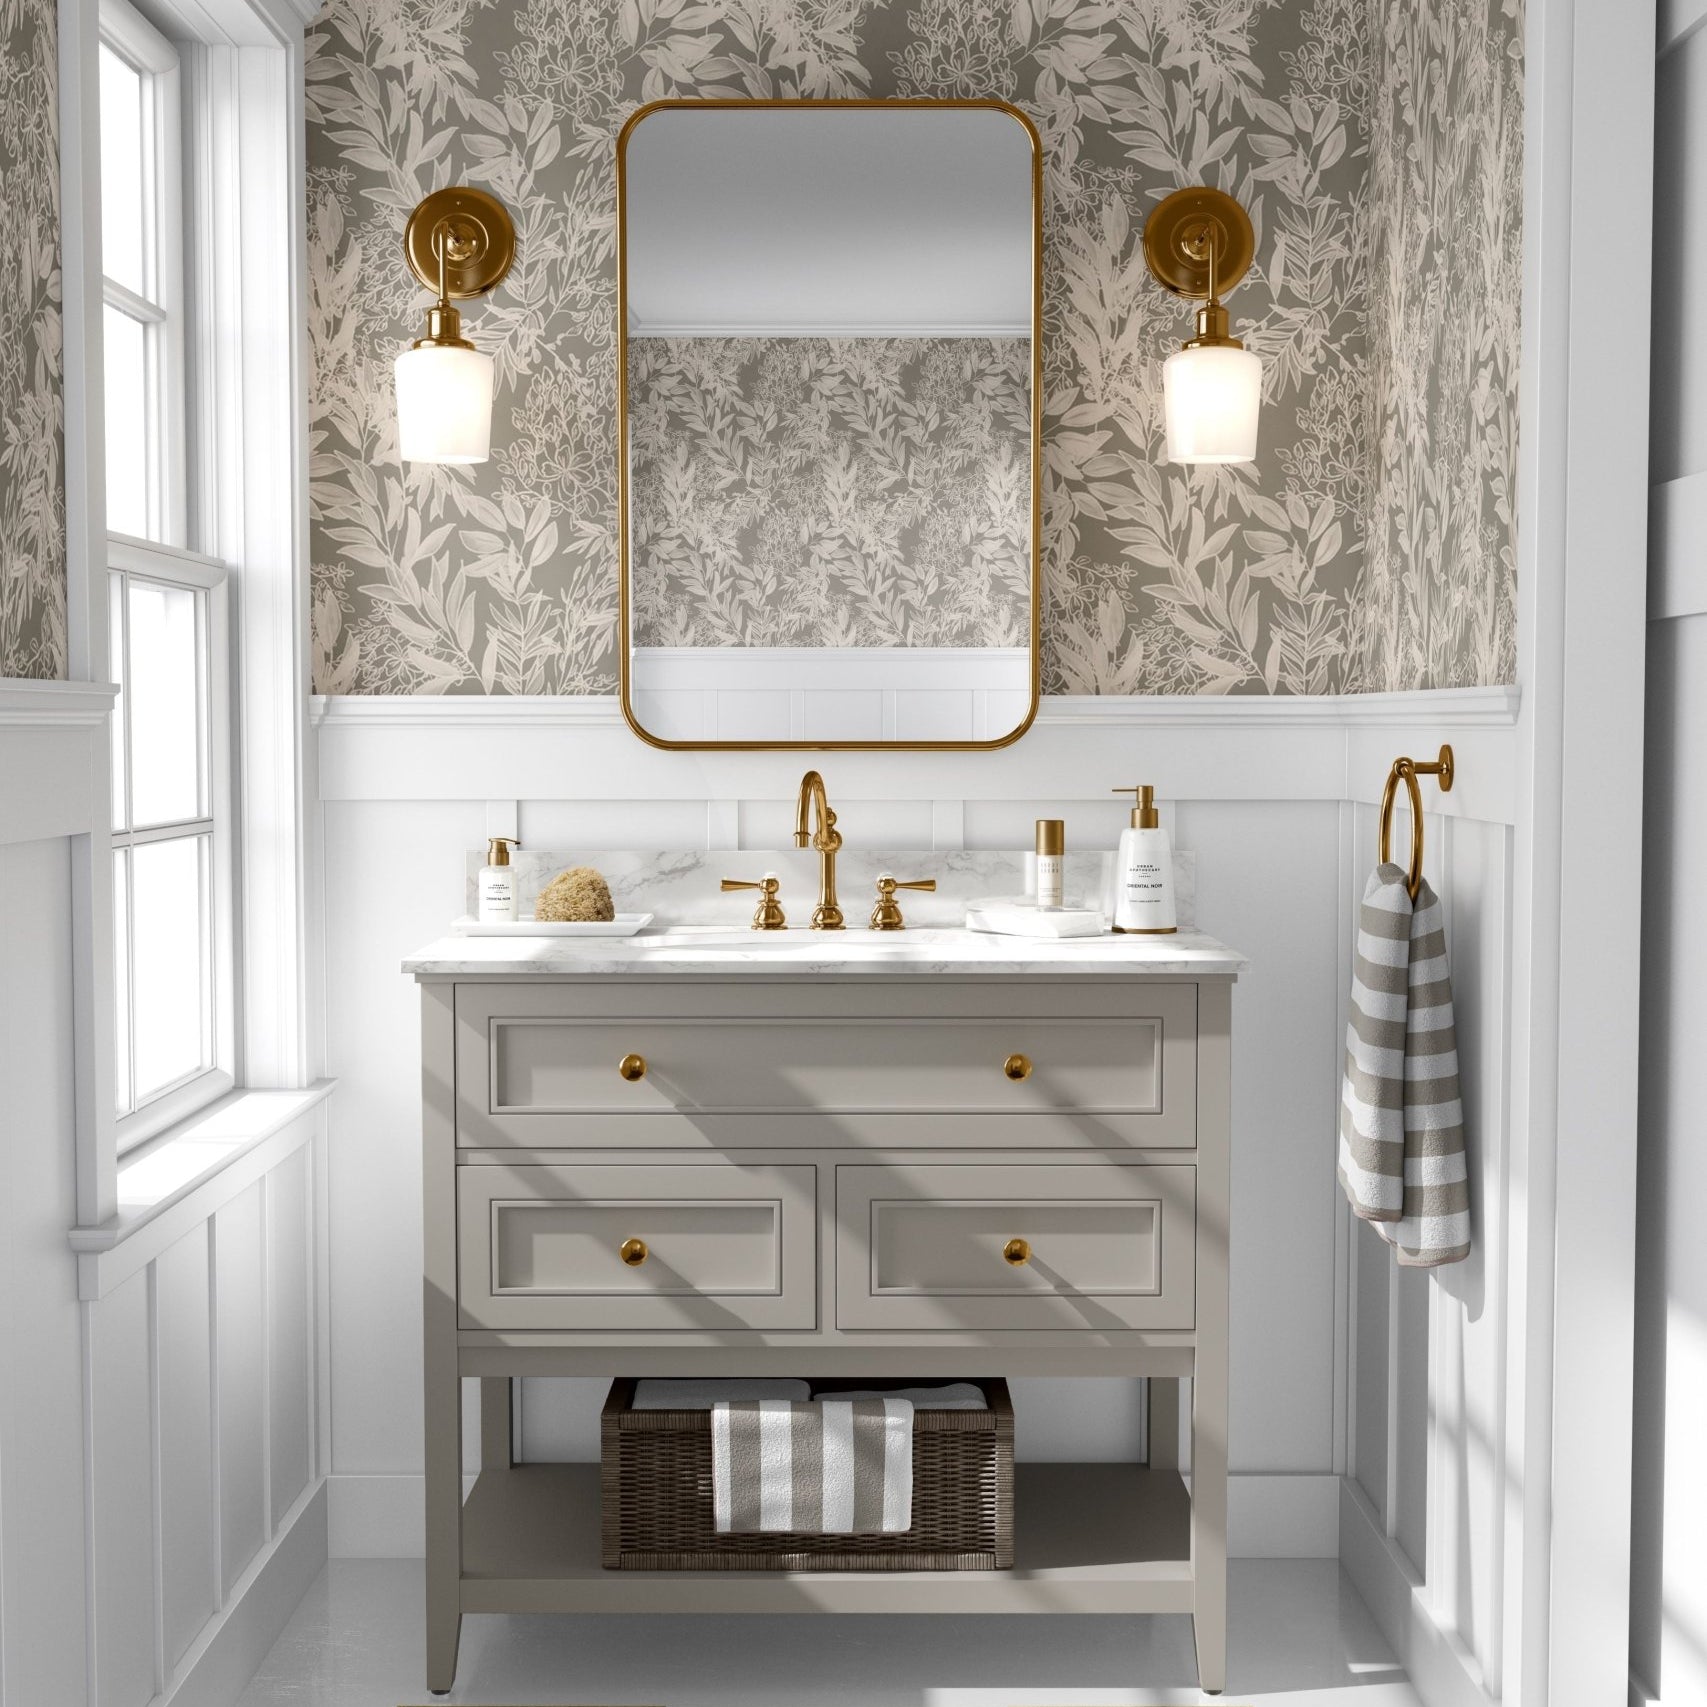  A well-lit bathroom interior with walls covered in a cream leaf pattern wallpaper that matches the previous image, completed with a wooden vanity with gold accents and a rectangular mirror.